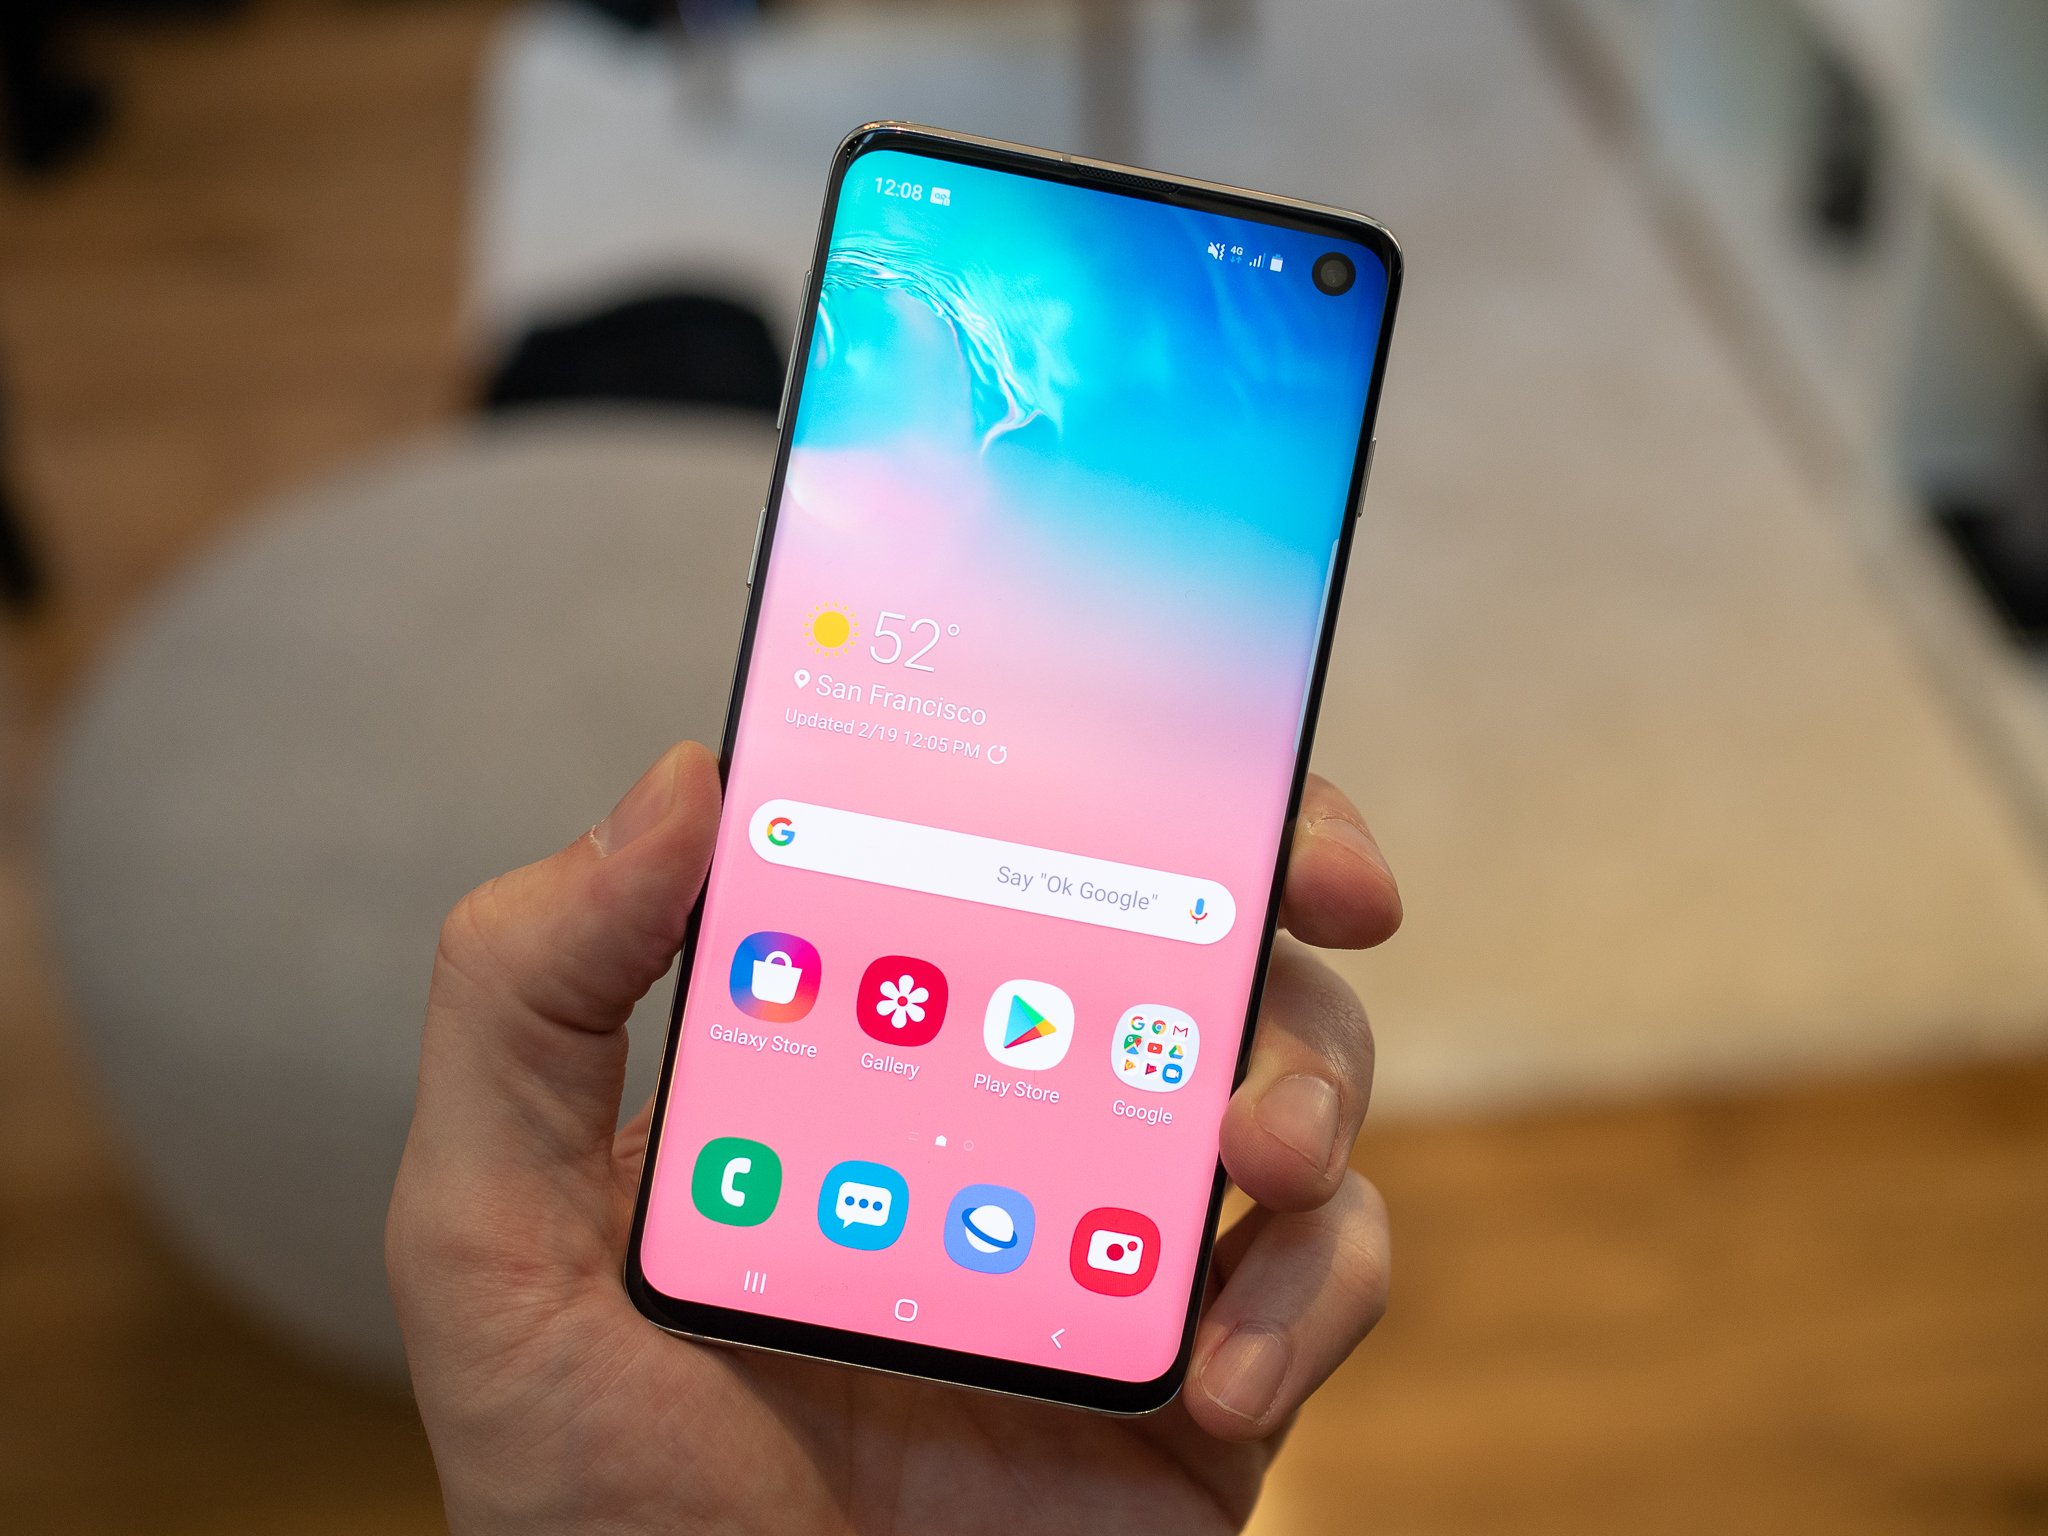 Holding the Samsung Galaxy S10